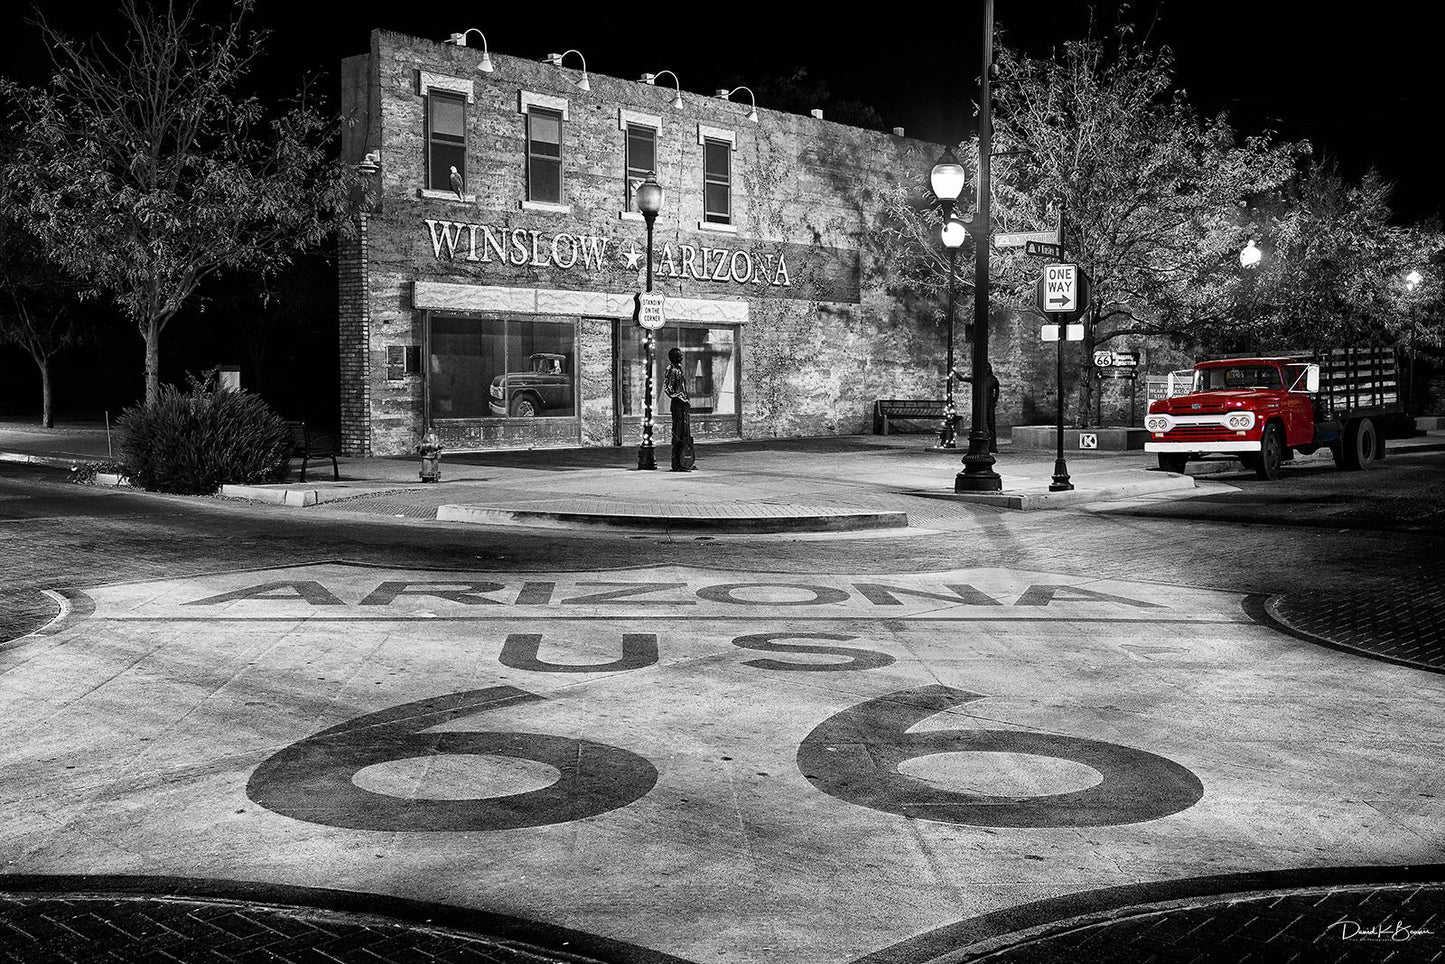 black and white image with building in background,and Arizona US 66 highway sign painted on ground in foreground.